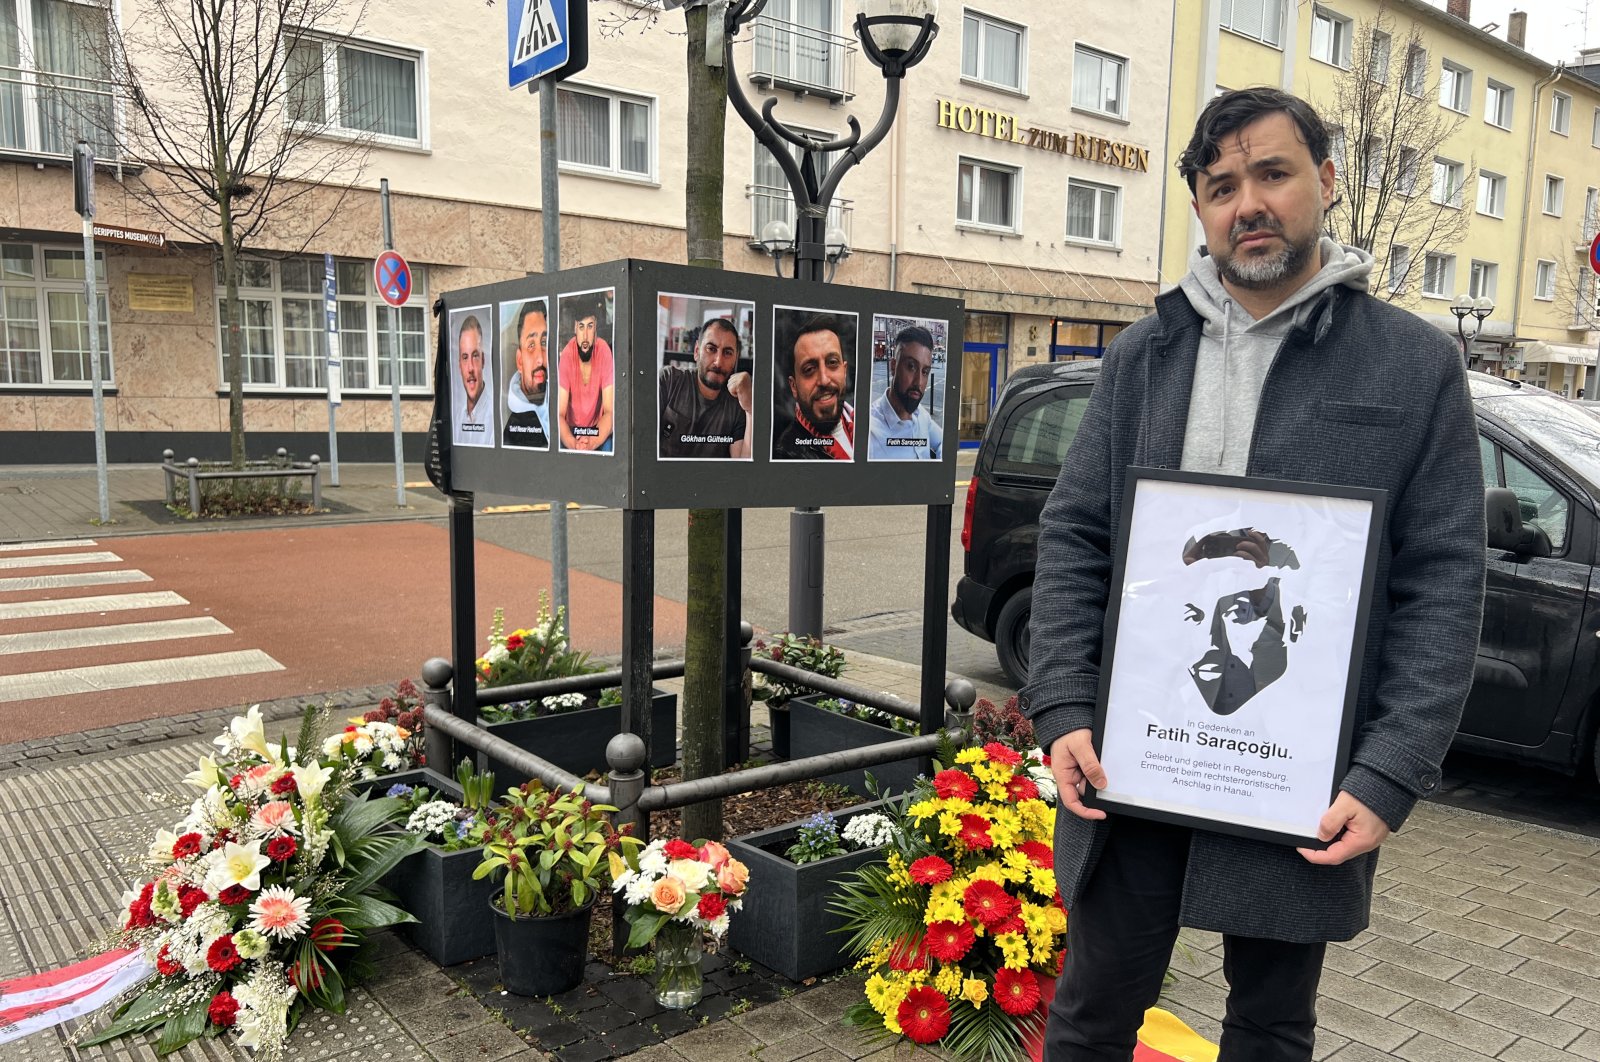 Hayrettin Saraçoğlu holds a picture of his brother Fatih Saraçoğlu, who was among the killed during the racist attack in Hanau, Germany in 2020, during a commemoration ceremony on the scene of the incident in Hanau, Feb. 19, 2023. (AA Photo)